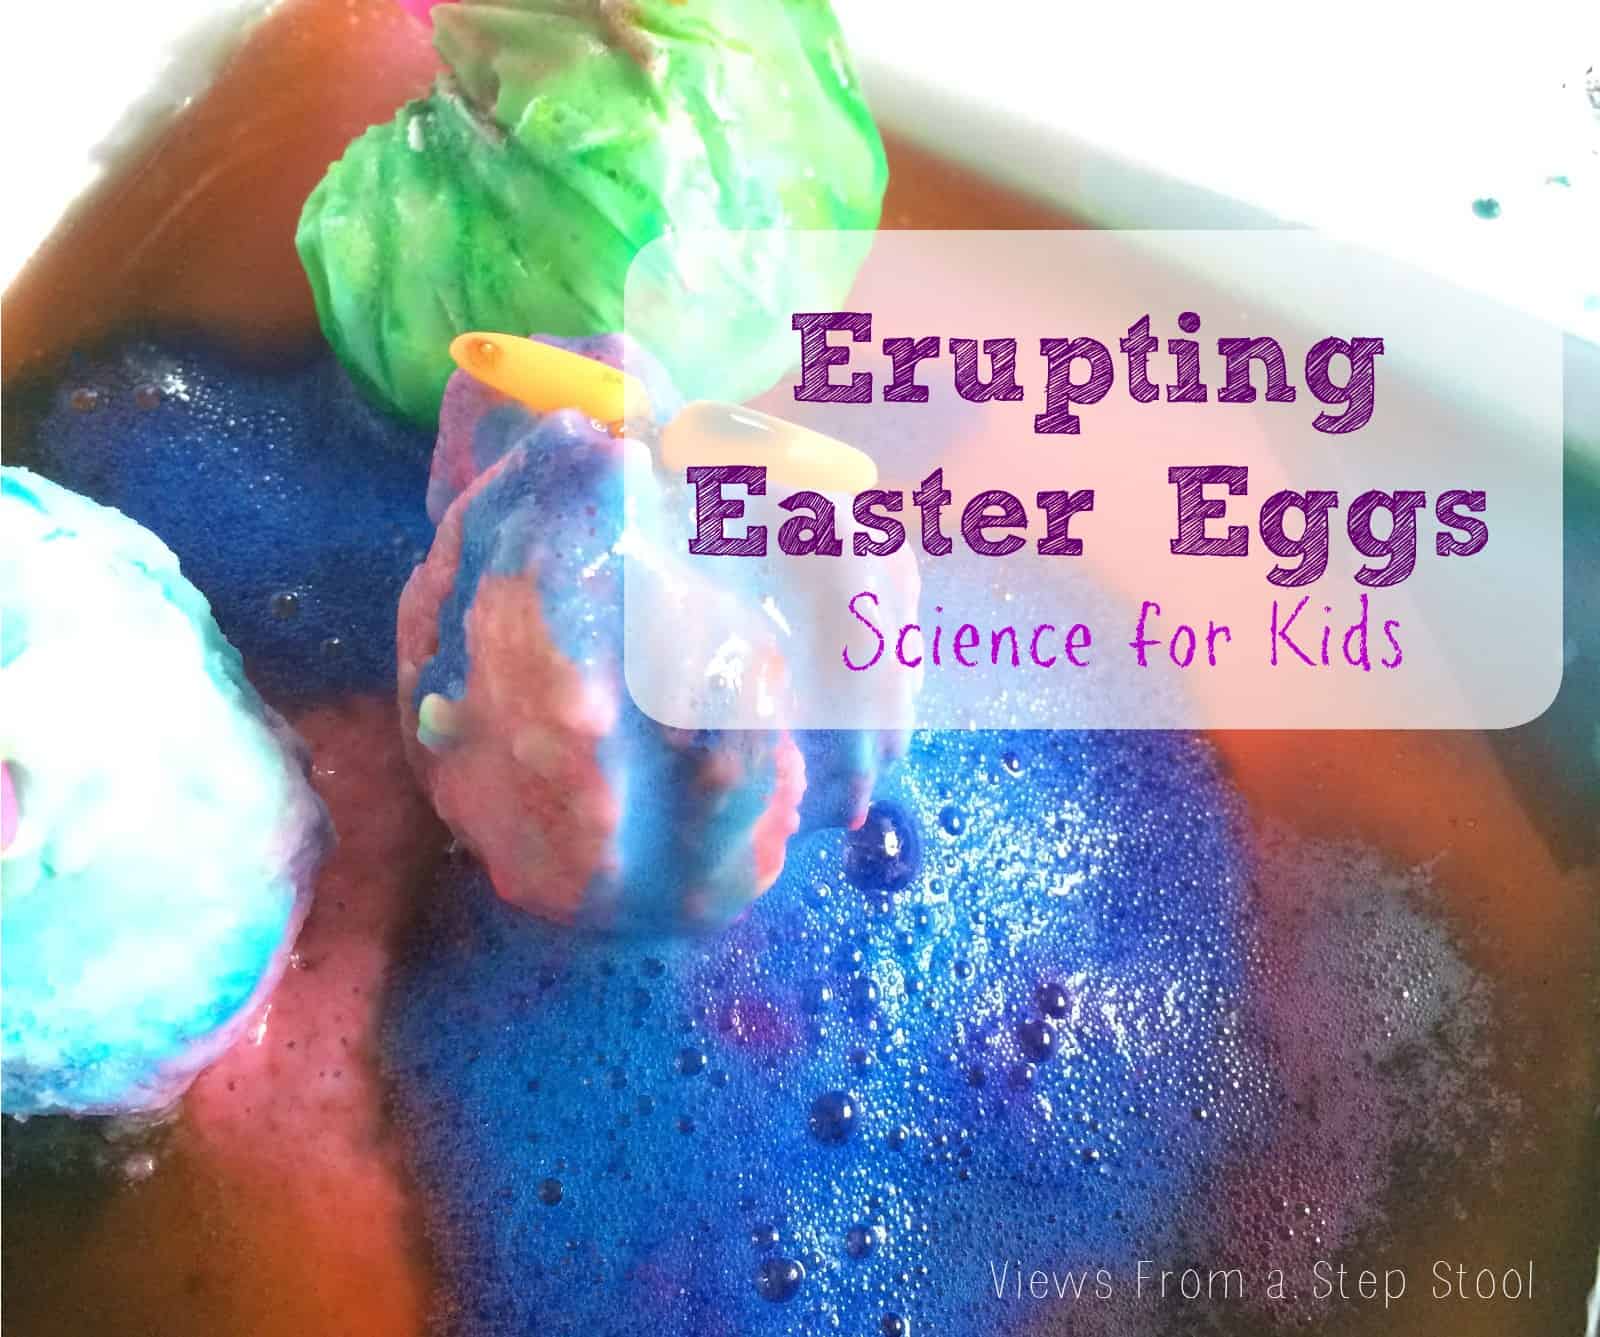 Make some baking soda eggs, hide a surprise inside, and let your kids make them erupt with some vinegar! They will love to do this again and again!